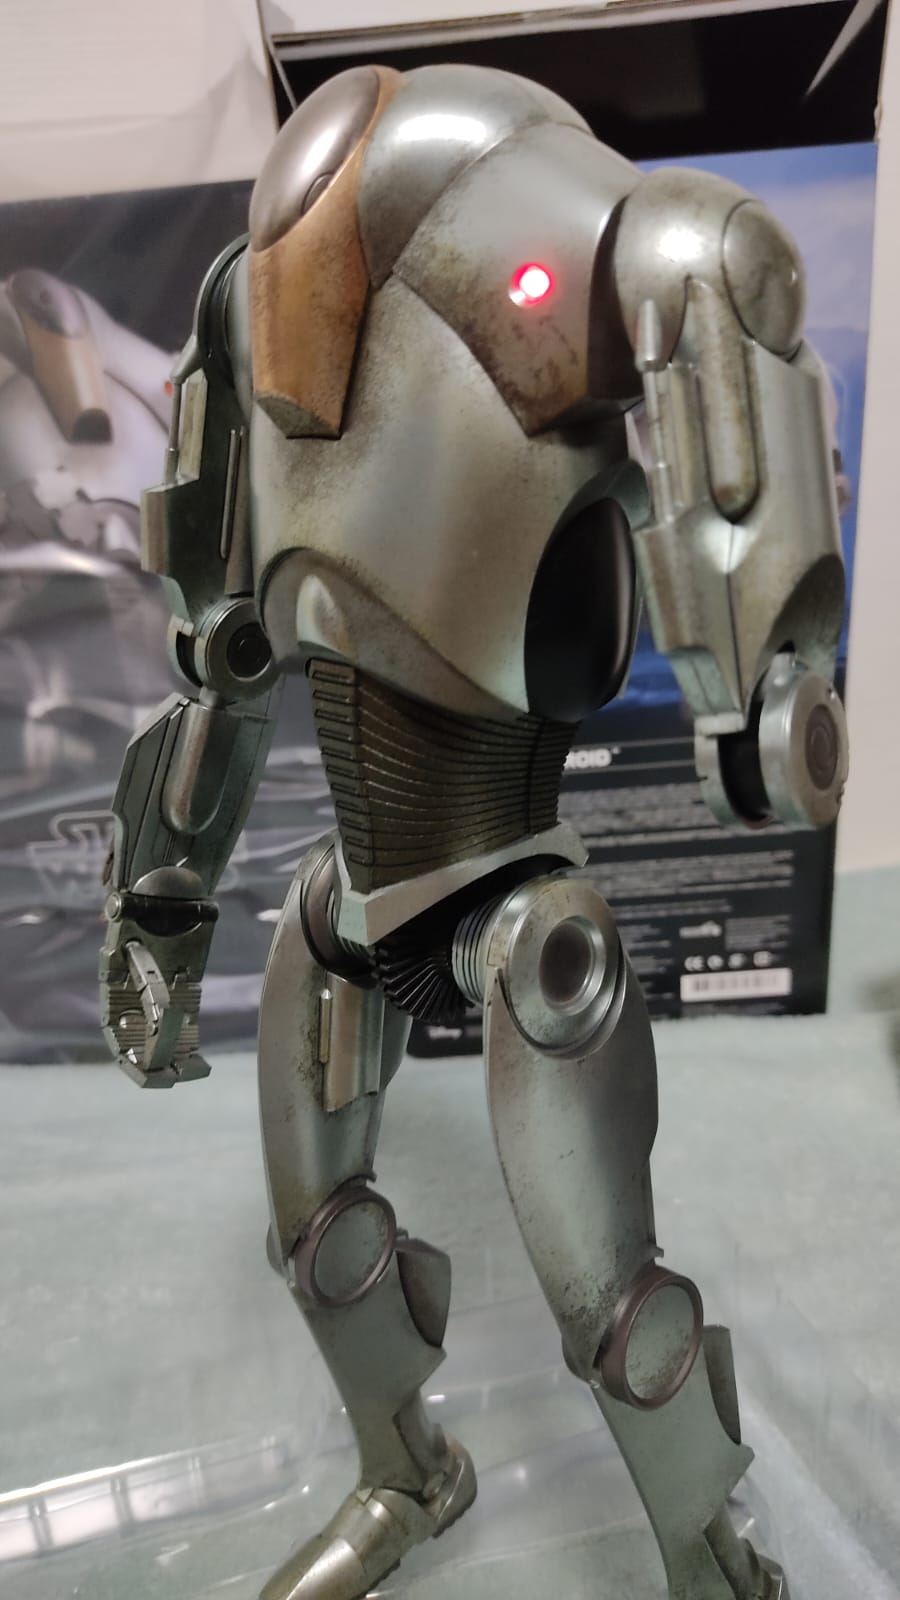 SuperBattleDroid - NEW PRODUCT: HOT TOYS: STAR WARS EPISODE II: ATTACK OF THE CLONES™ SUPER BATTLE DROID™ 1/6TH SCALE COLLECTIBLE FIGURE Whats166